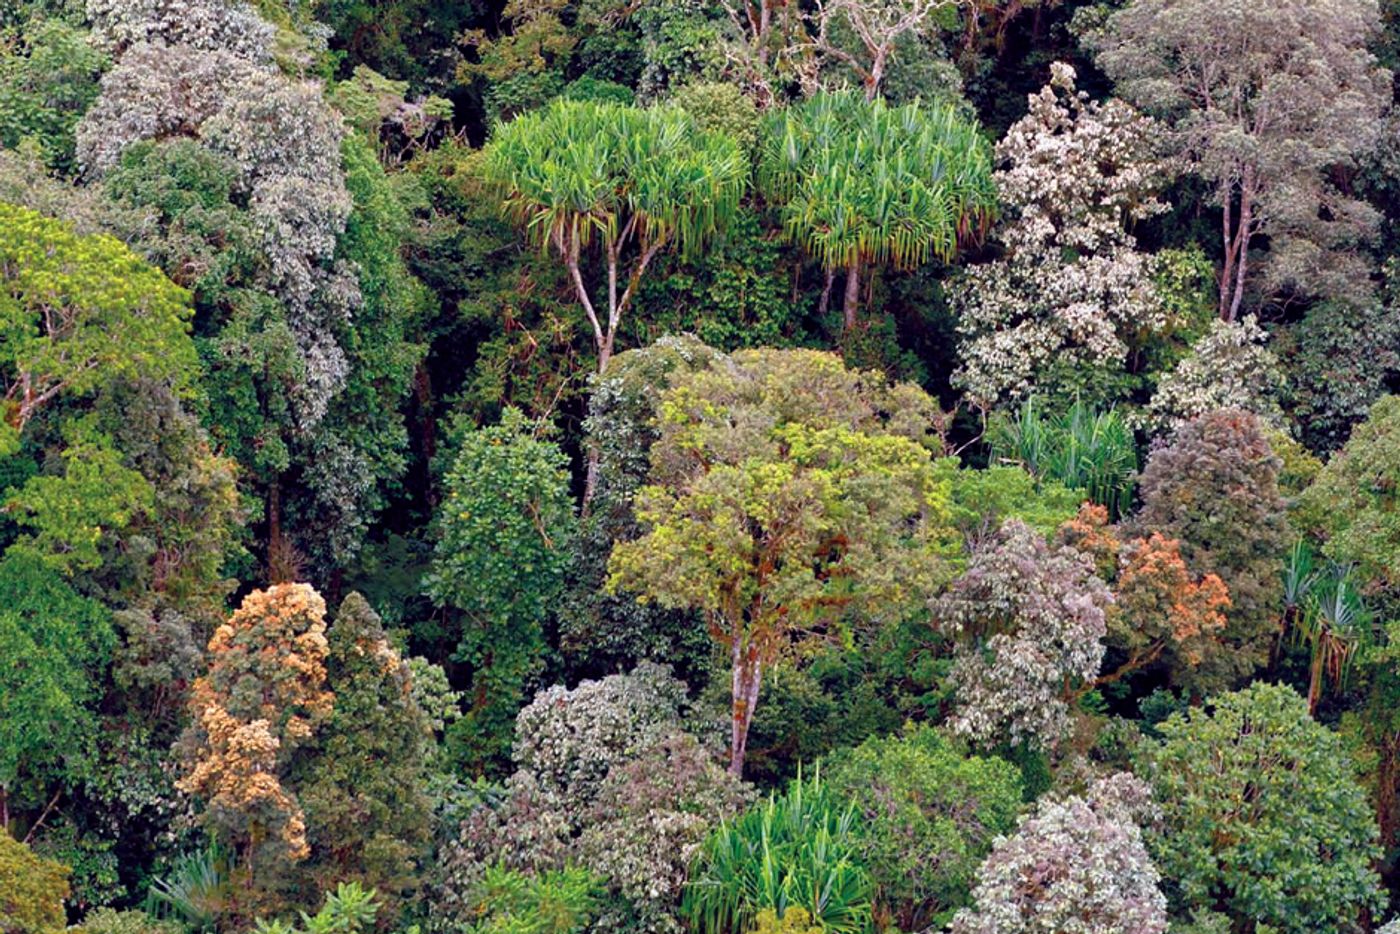 Forest diversity is crucial to drought resilience. Photo: ABC